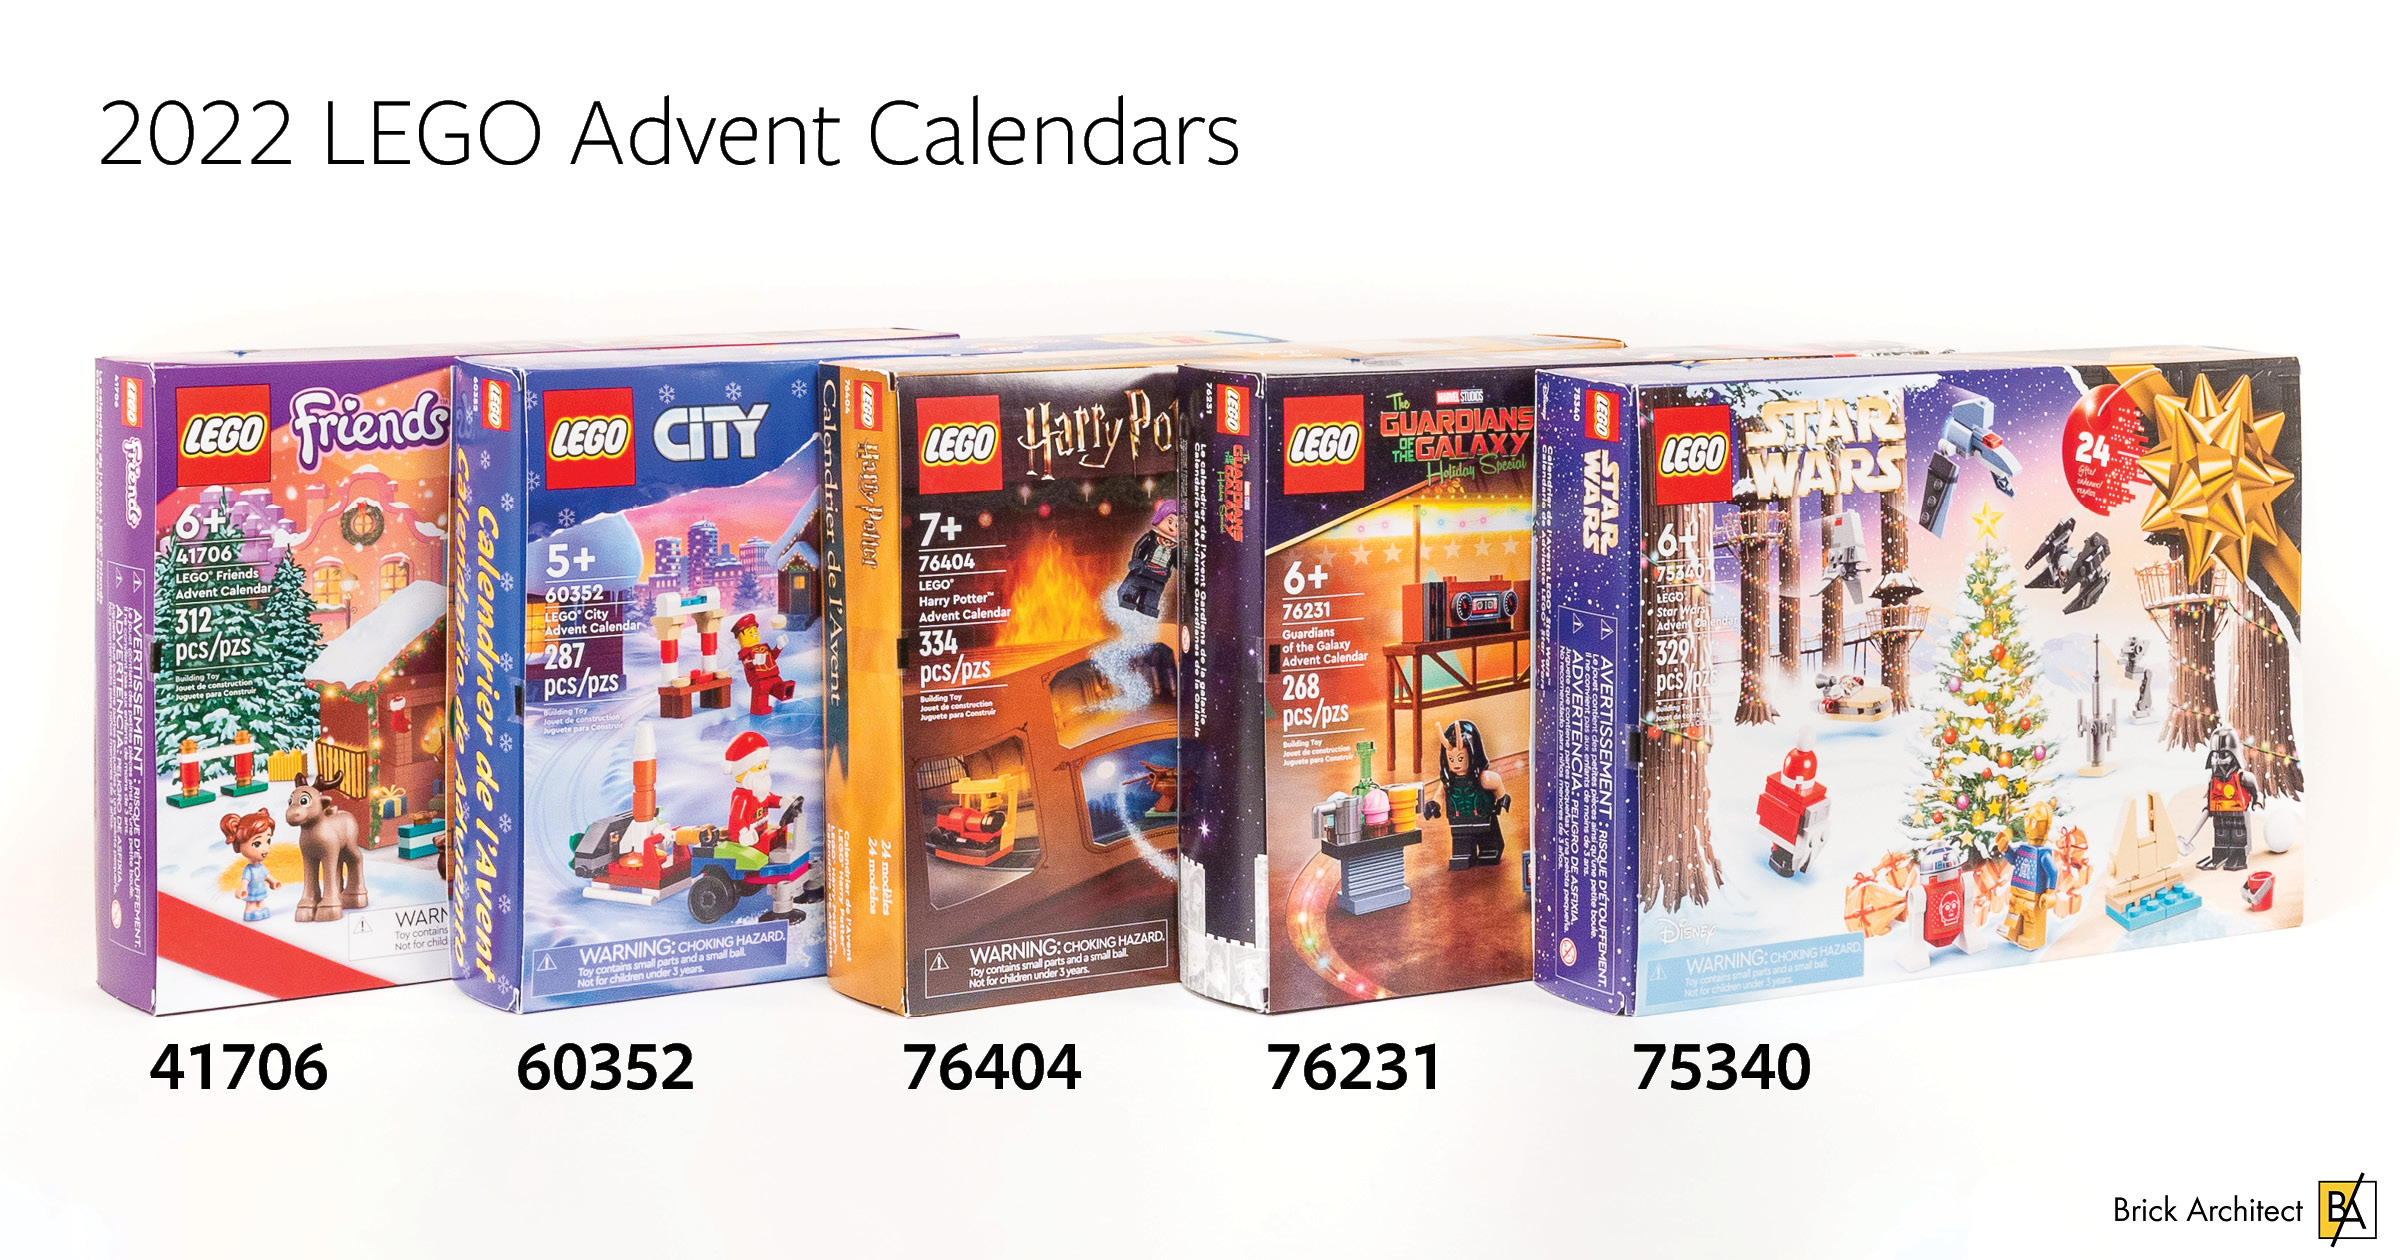 Choose from the five 2022 LEGO Advent Calendars in our spoiler-minimizing review!